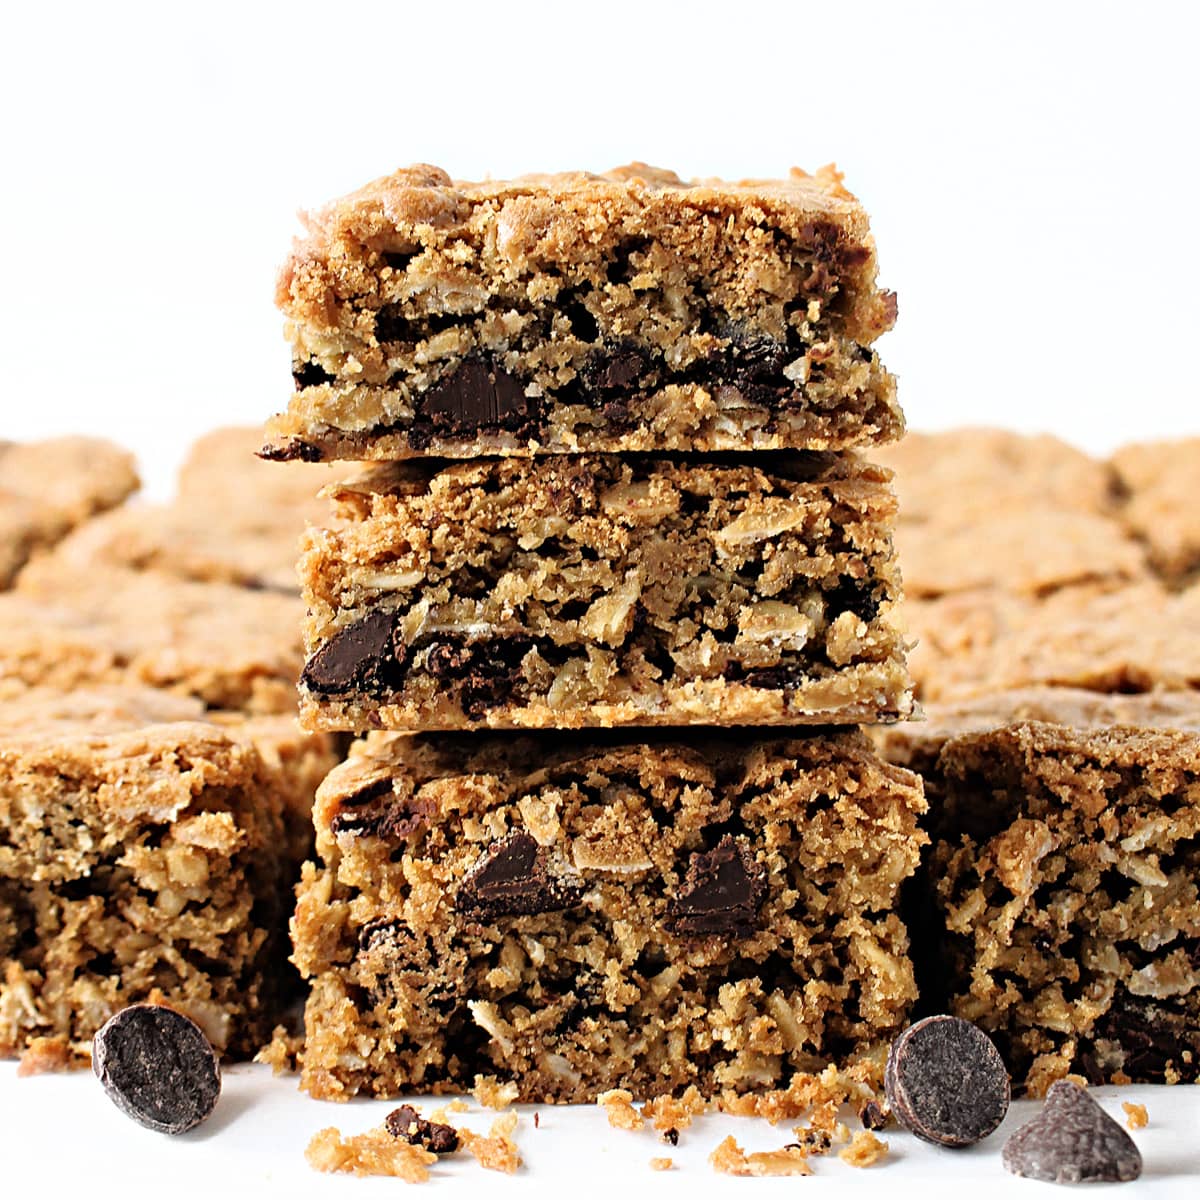 Stack of oatmeal bars showing interior with oats and chocolate chips.